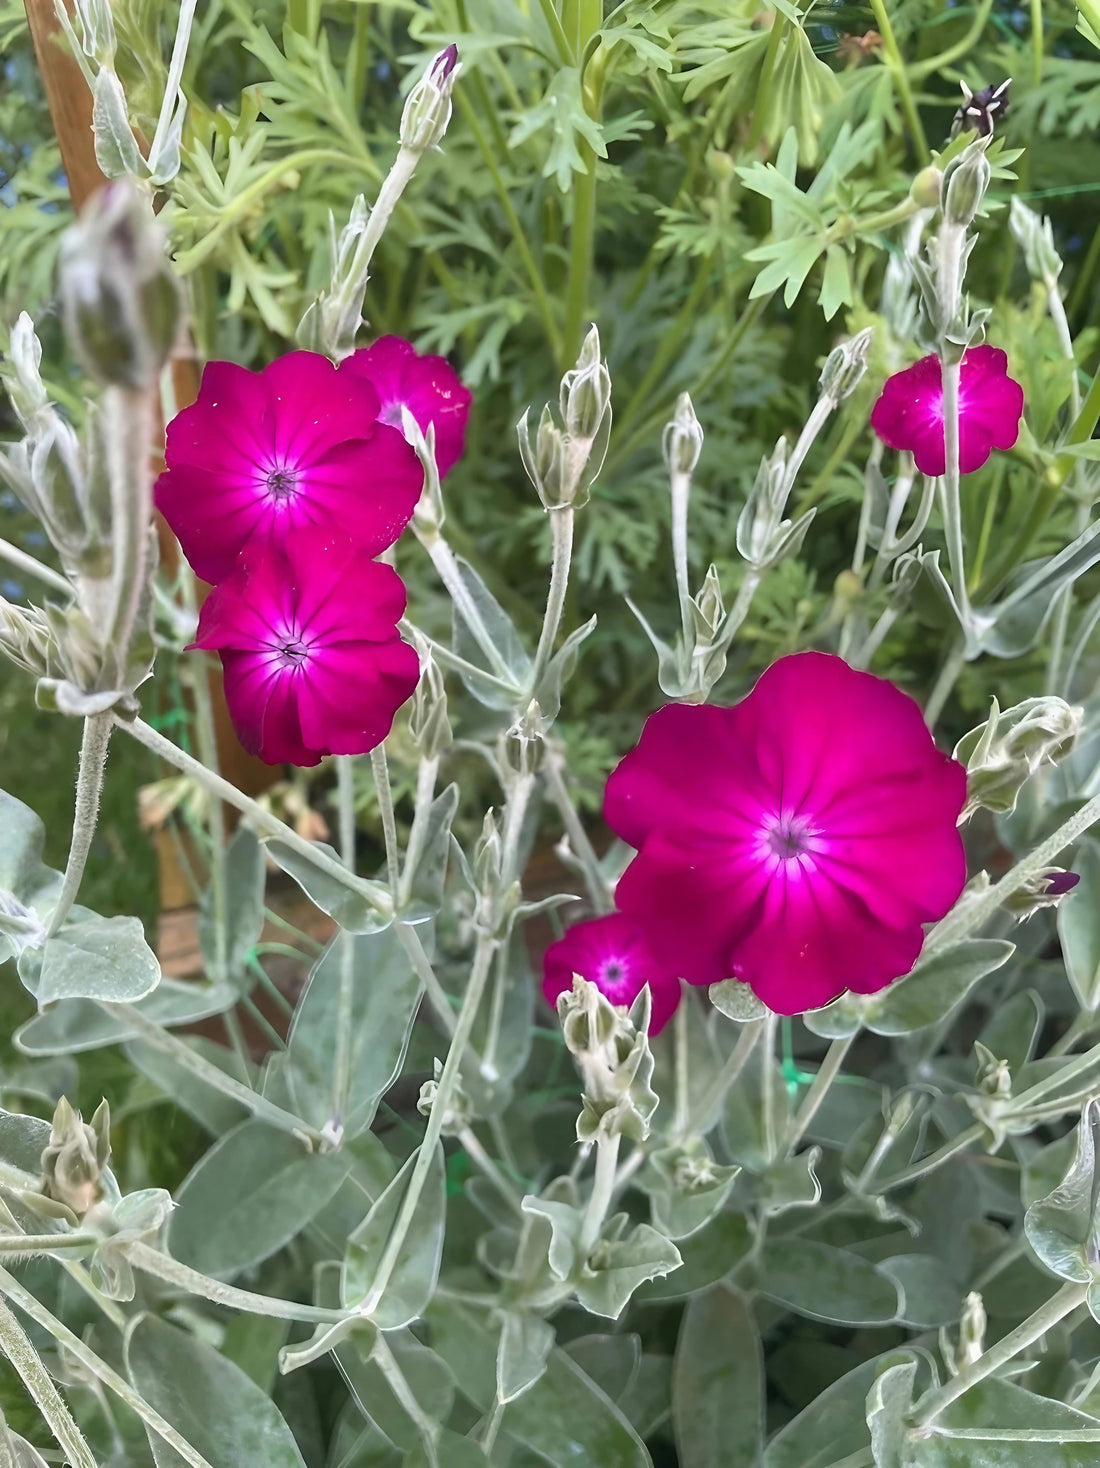 Close-up of Rose Campion with vibrant magenta blossoms in a garden setting